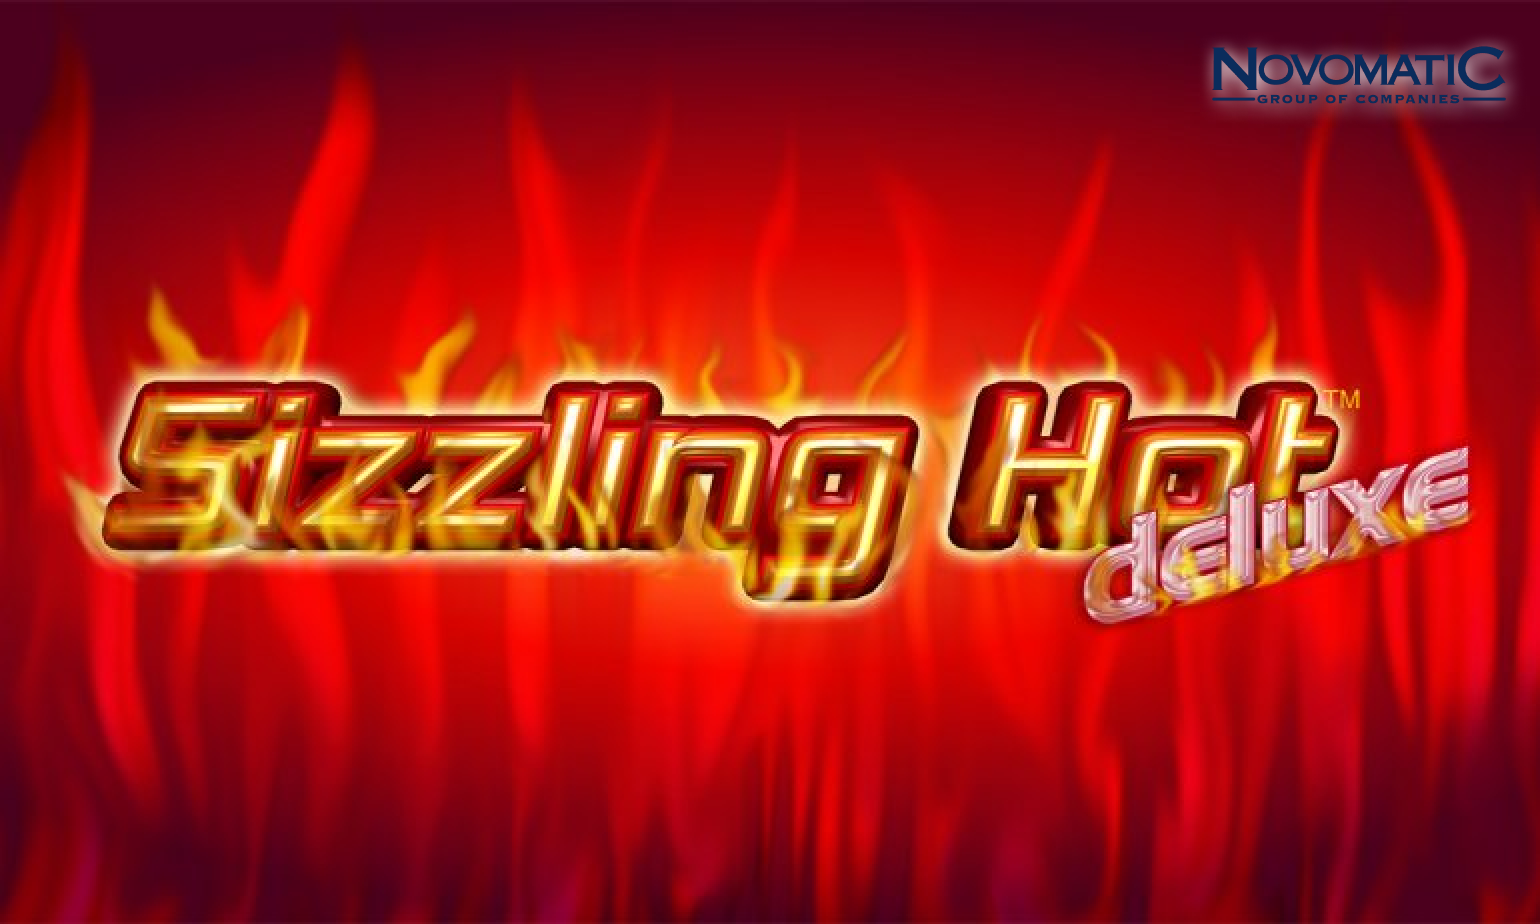 Sizzling Hot Deluxe by Novomatic